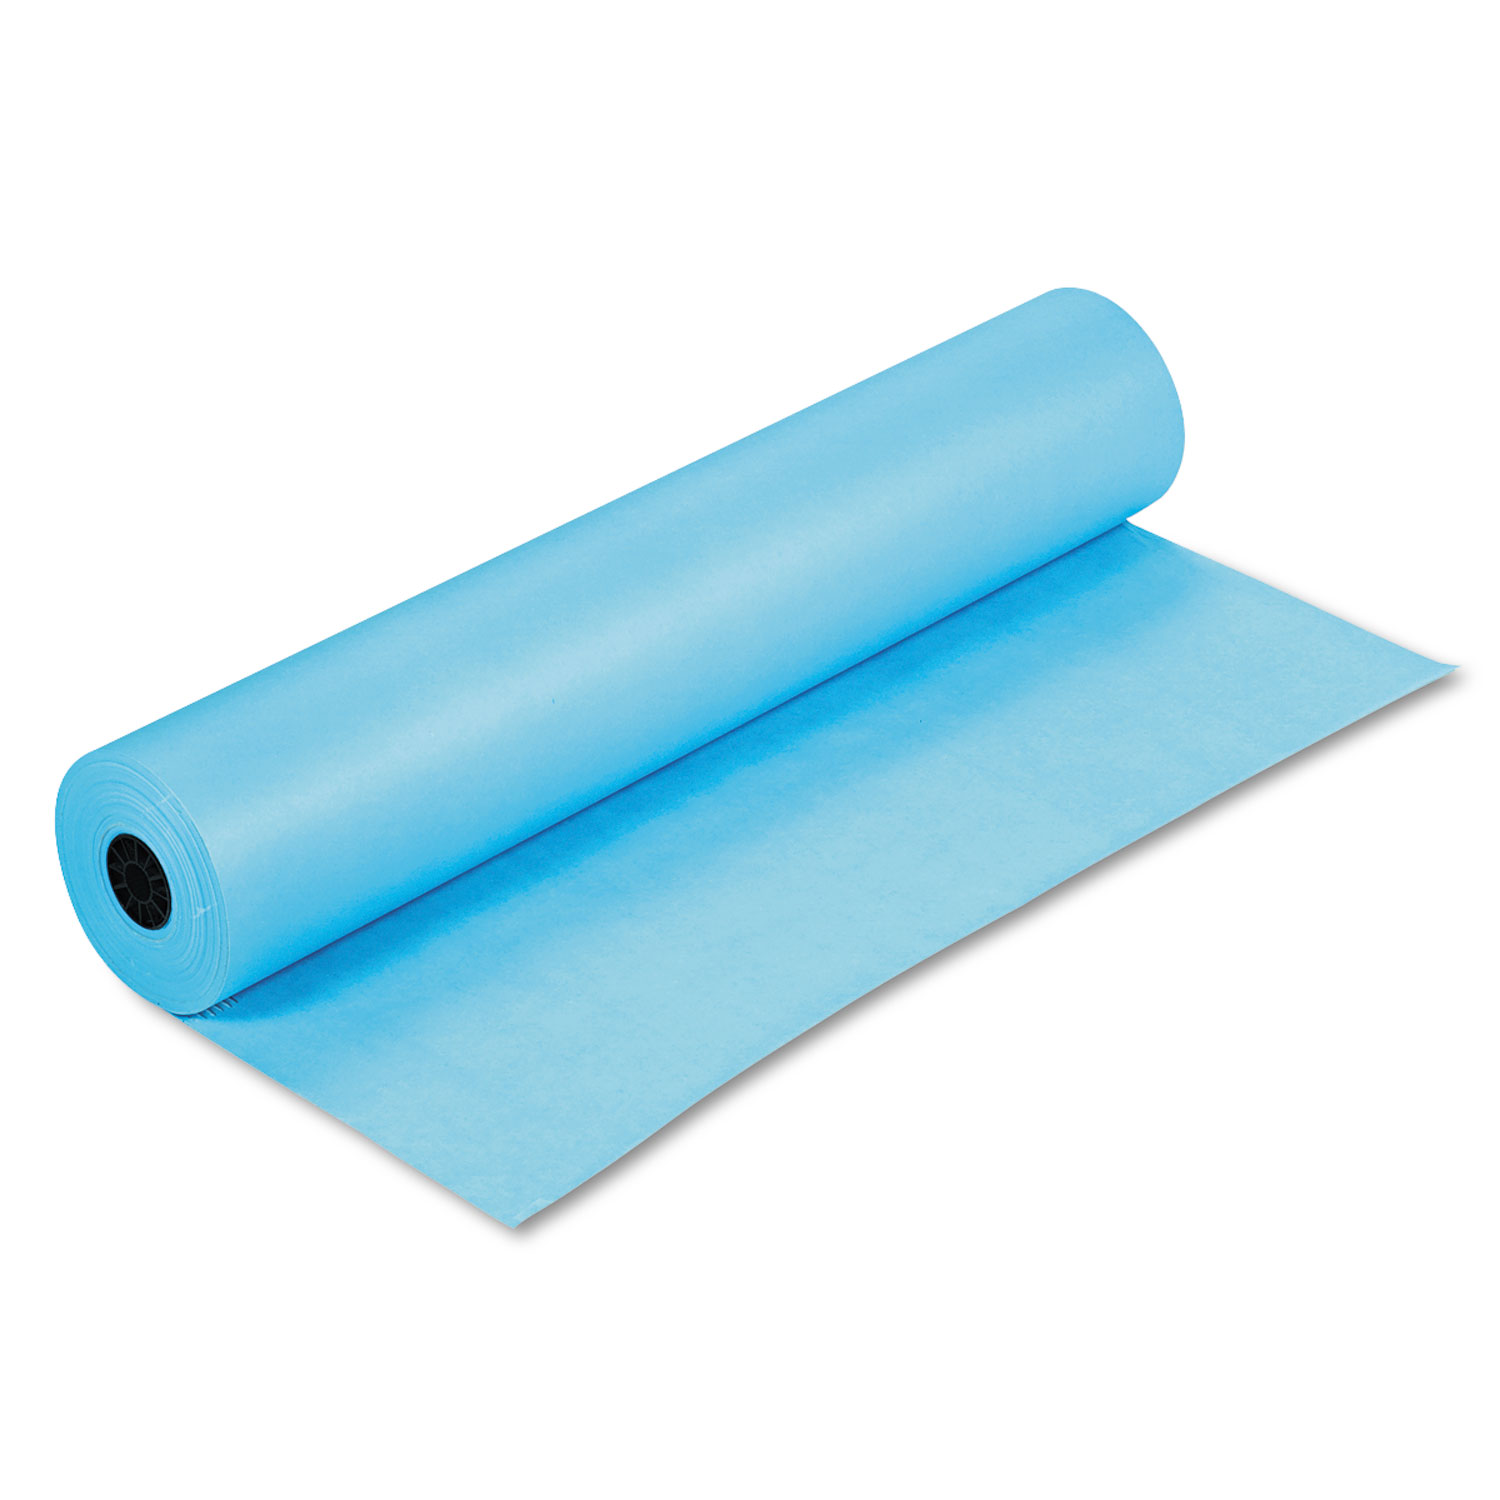  Pacon 63150 Rainbow Duo-Finish Colored Kraft Paper, 35lb, 36 x 1000ft, Sky Blue (PAC63150) 